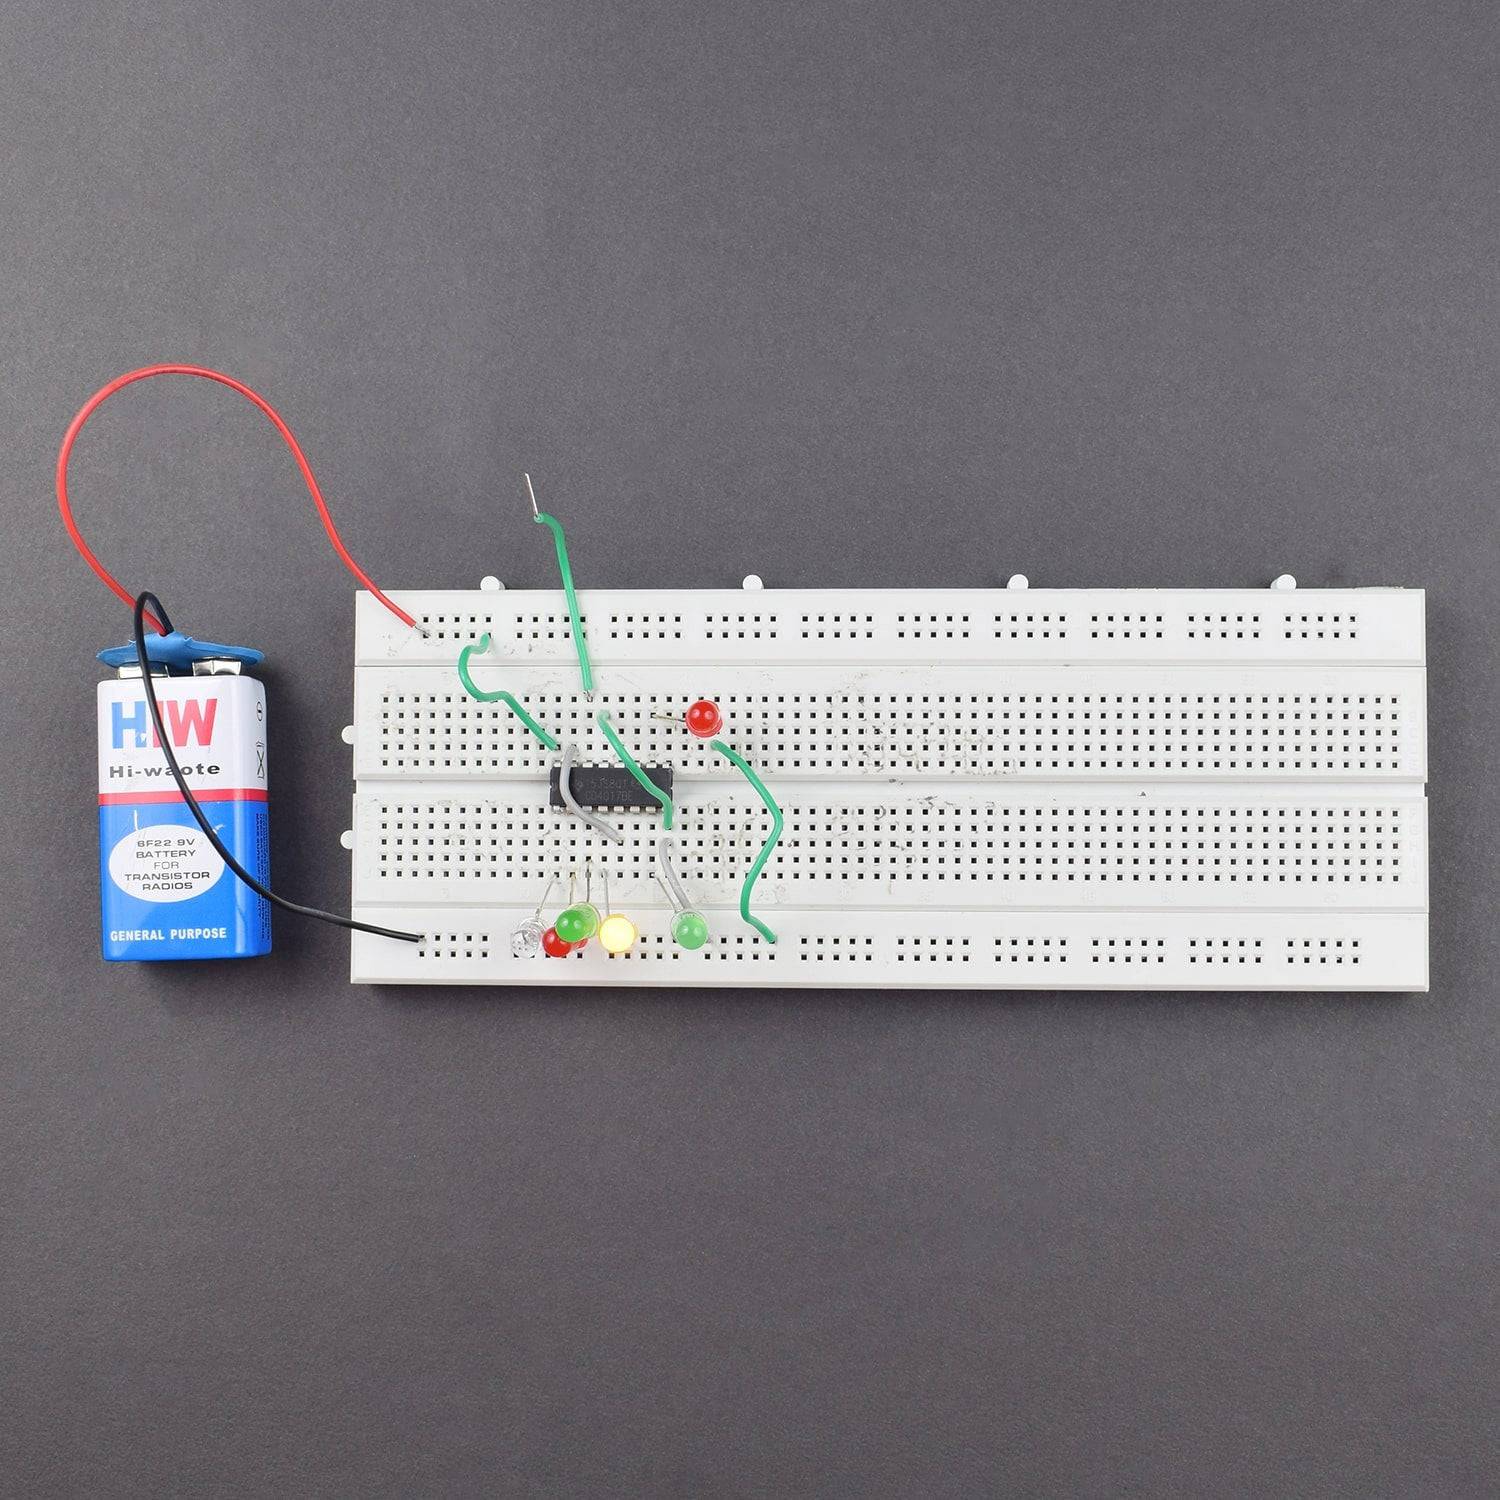 Make an Electronic dice using 4017 IC - KT966 - REES52